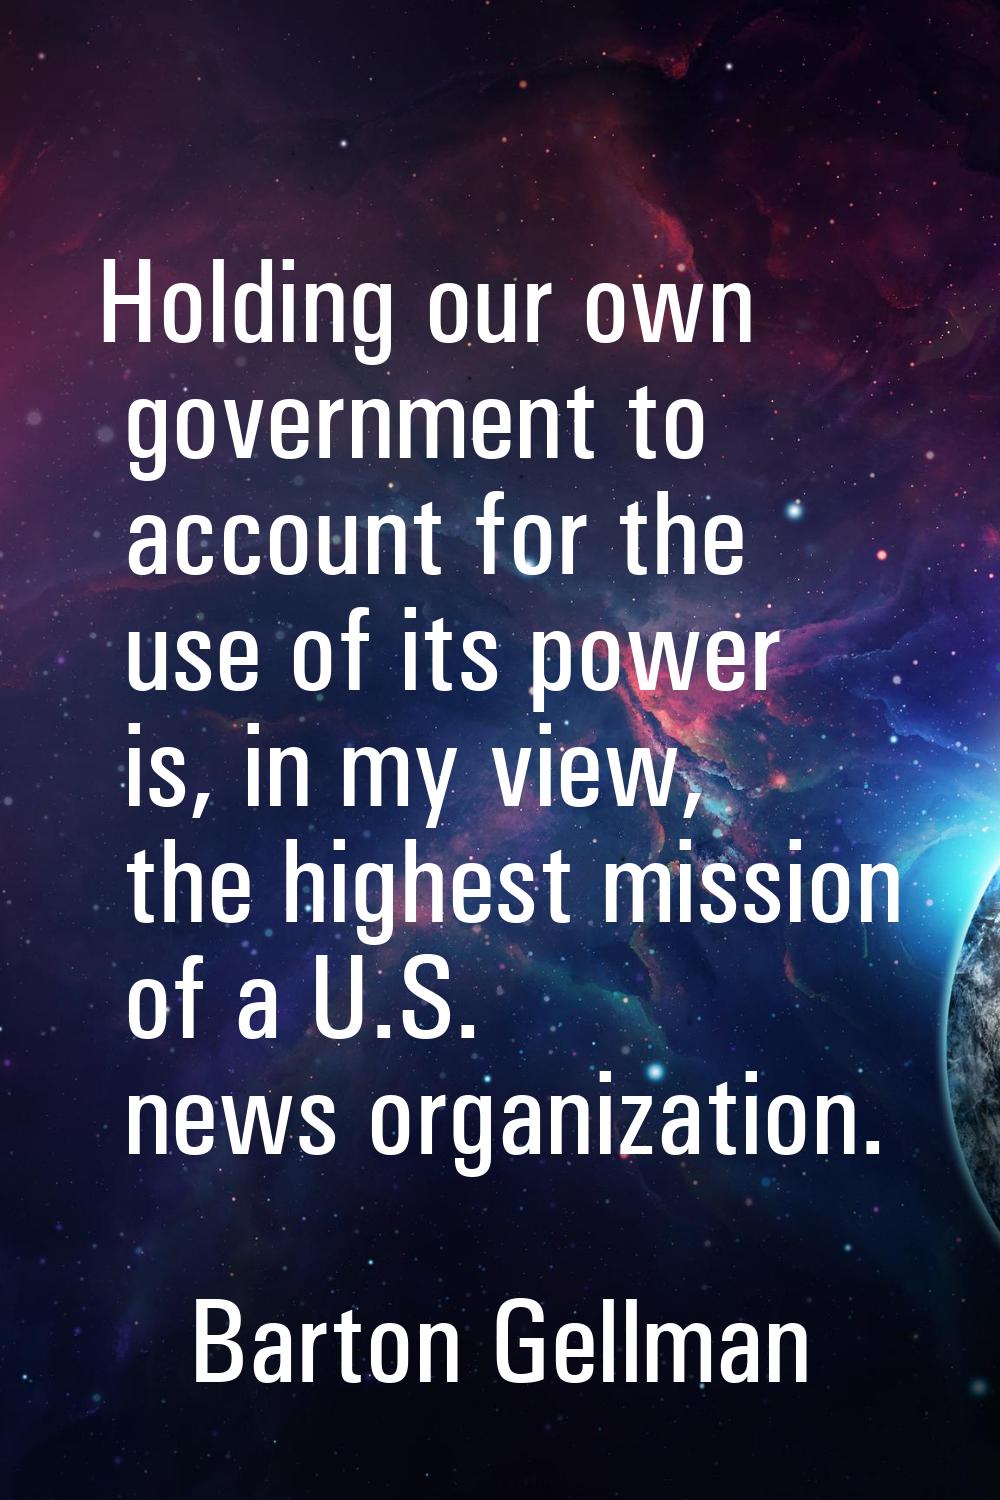 Holding our own government to account for the use of its power is, in my view, the highest mission 